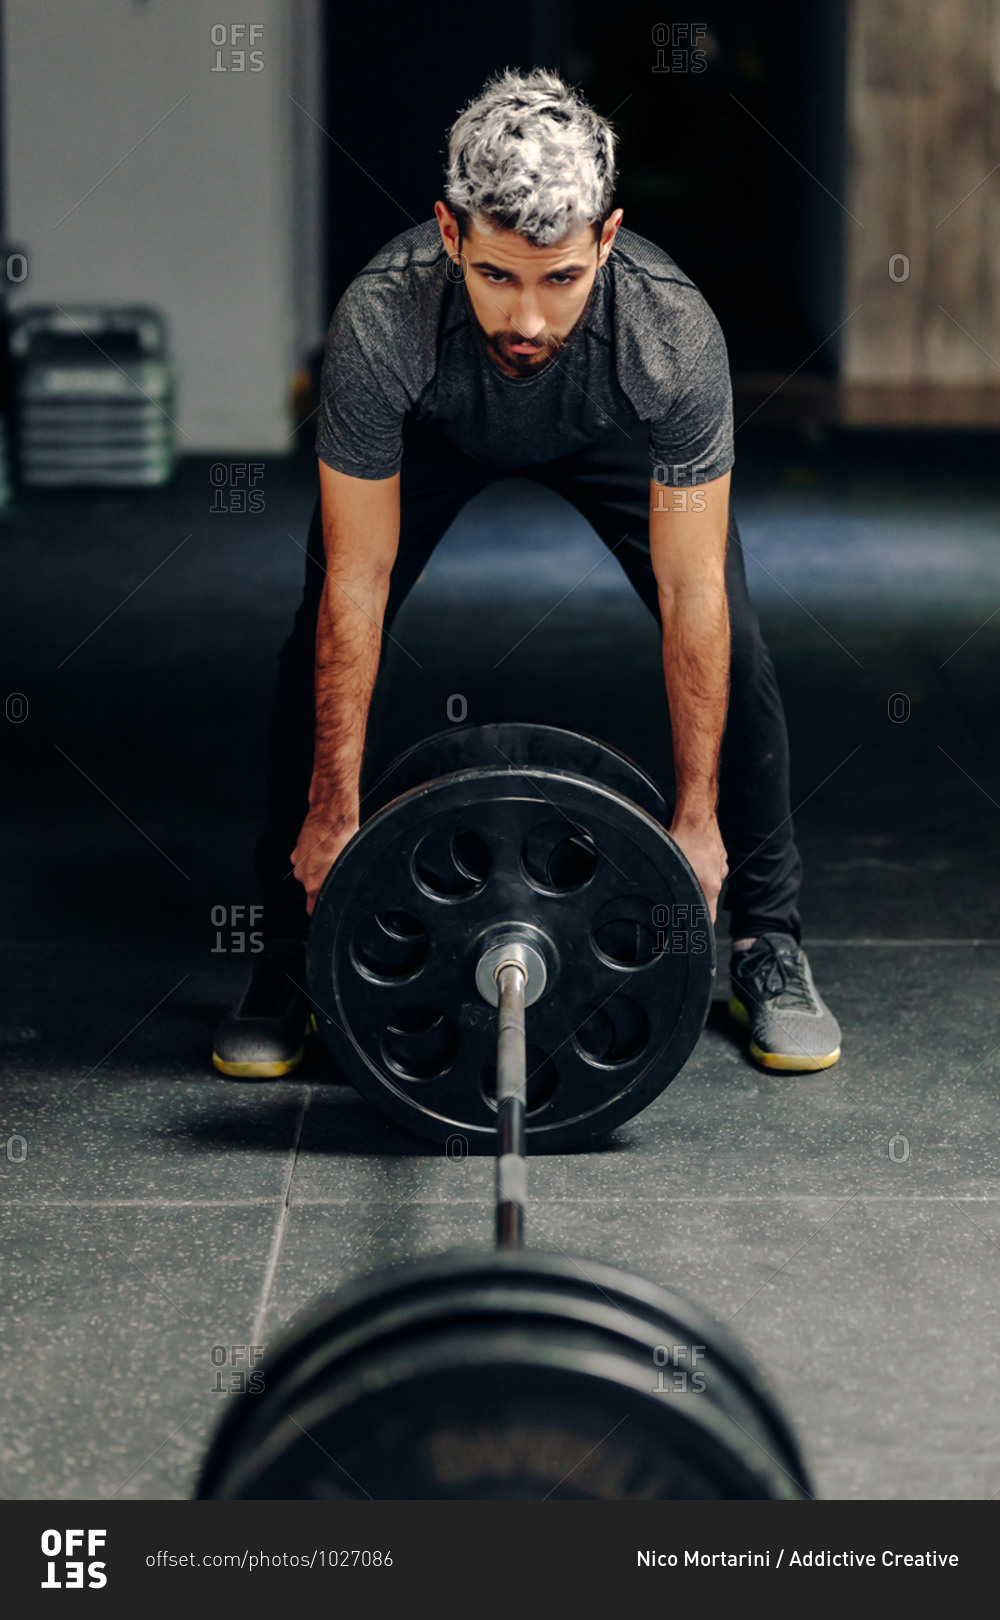 Male athlete in sportswear putting heavy plates on barbell while preparing for weightlifting workout in gym